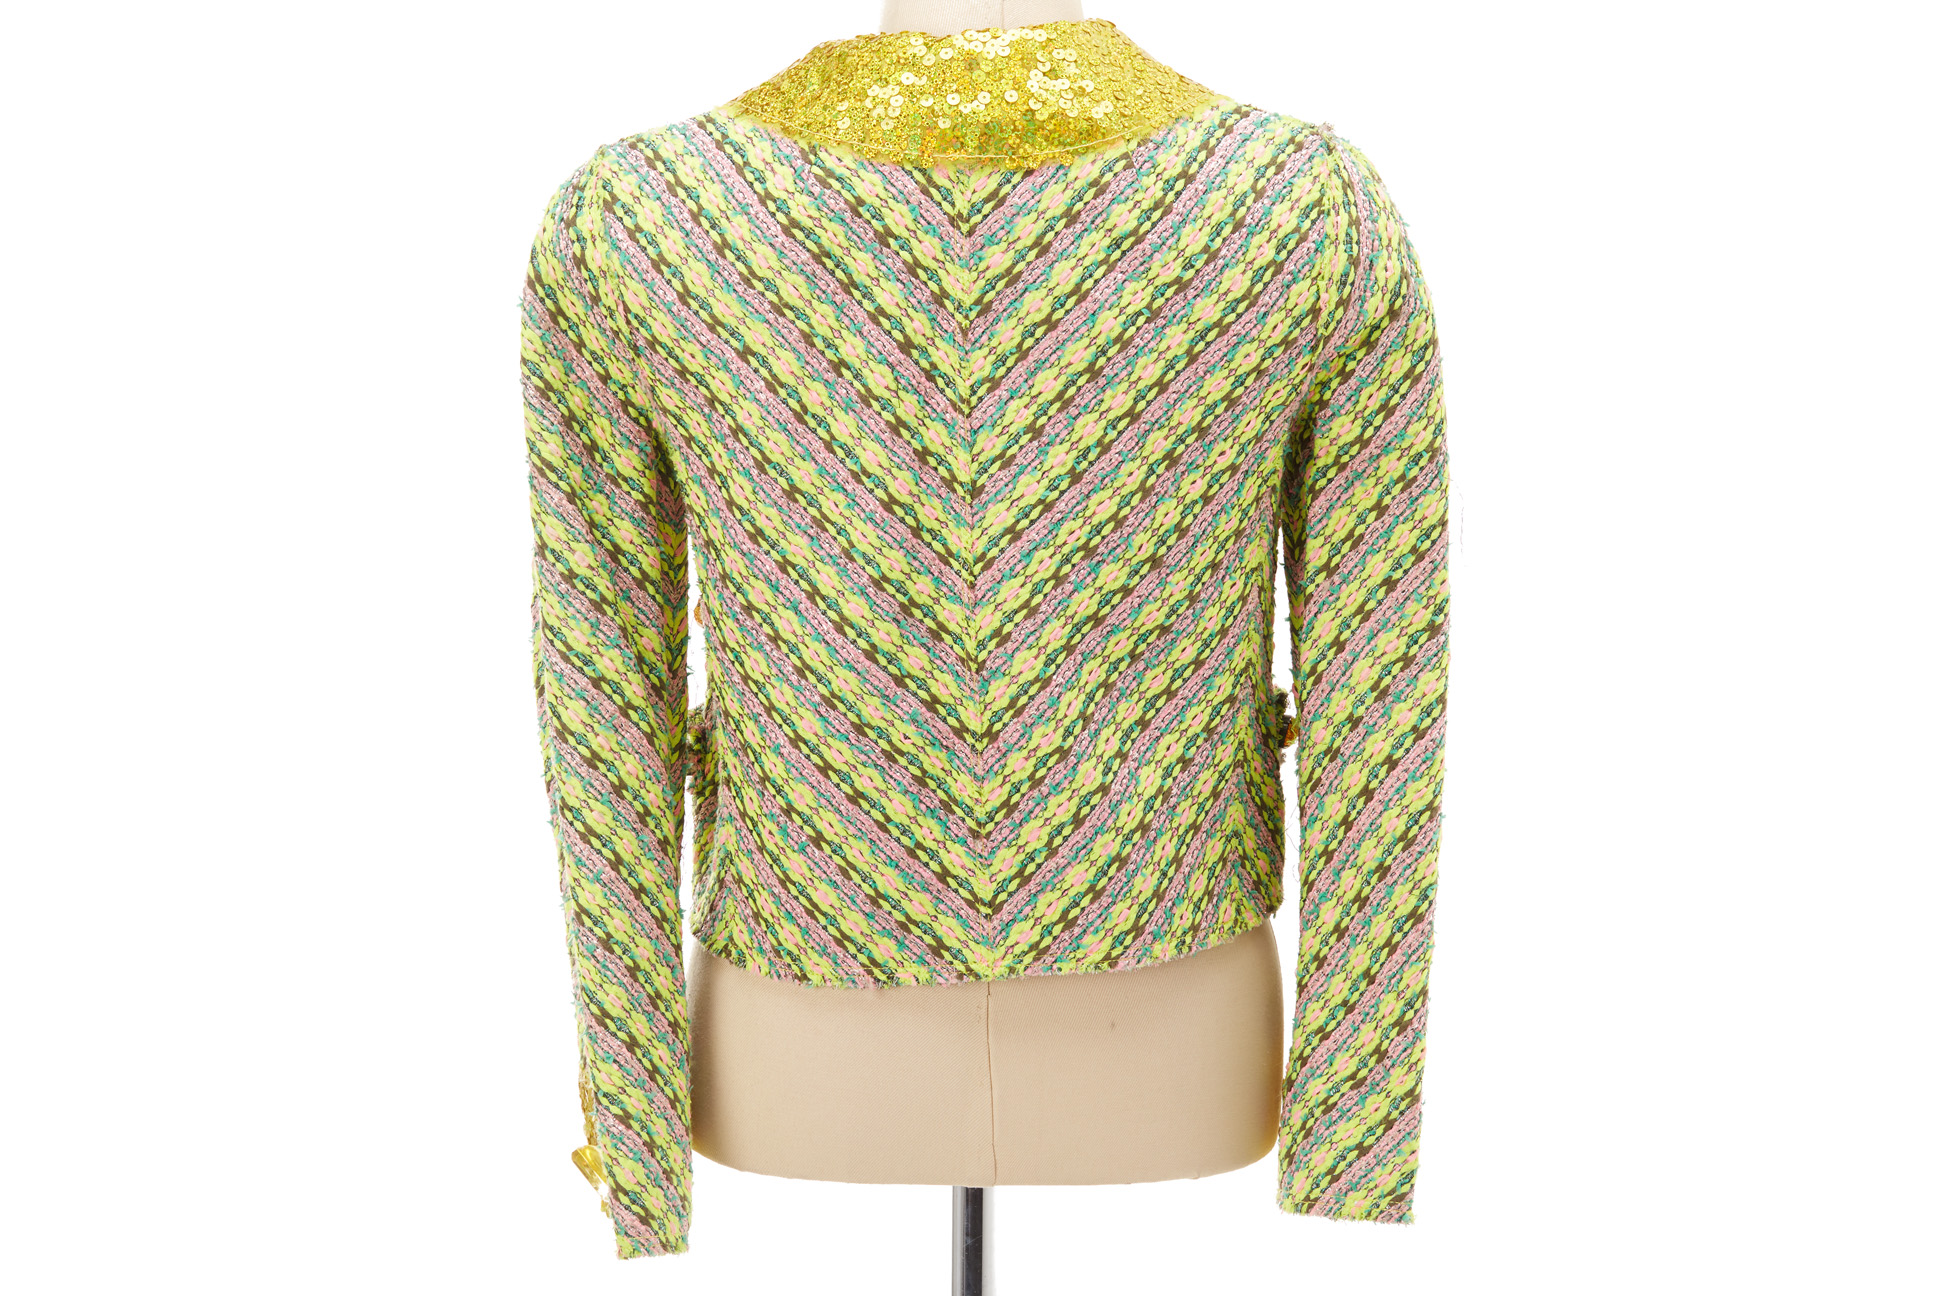 A MARC JACOBS MULTICOLOURED & YELLOW SEQUIN TWEED JACKET - Image 3 of 3